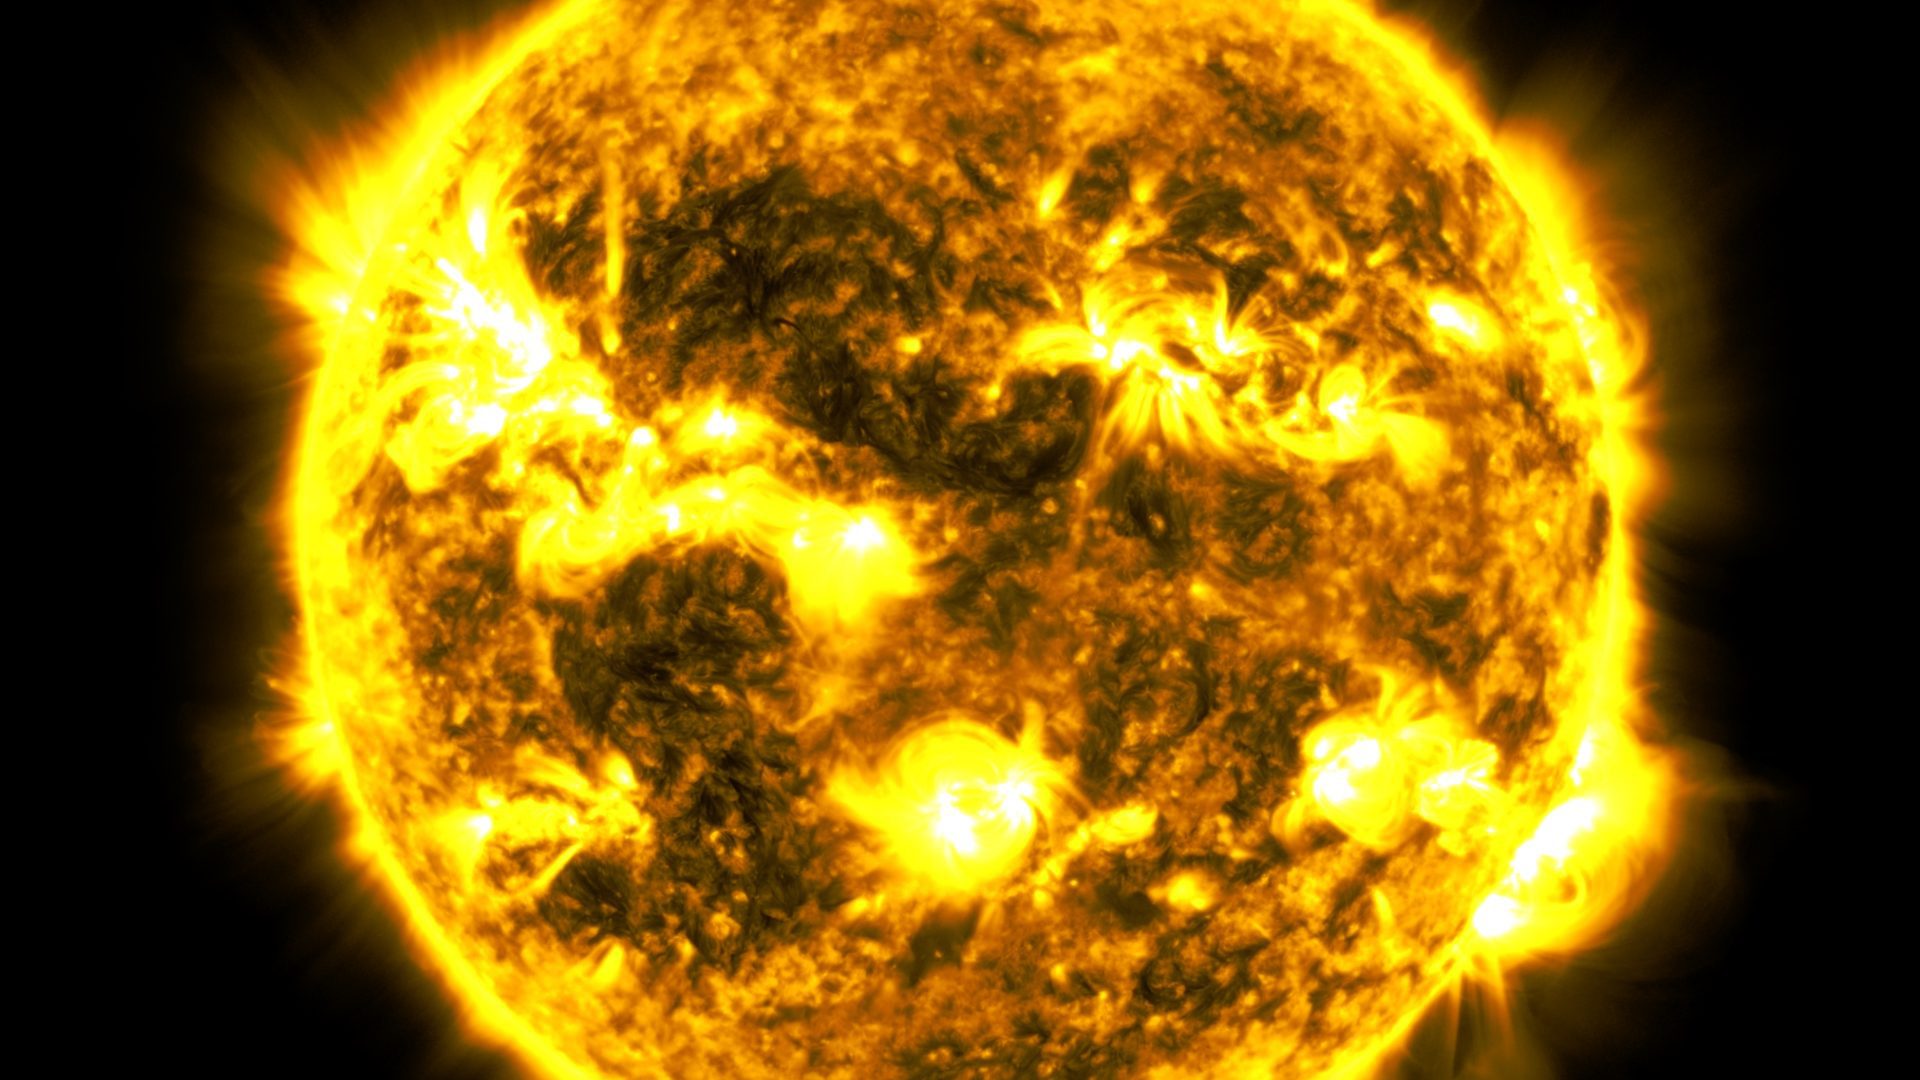 This 10-year time lapse of the Sun at 17.1 nanometers (an extreme ultraviolet wavelength that shows the Sun’s outermost atmospheric layer – the corona) shows the rise and fall of the solar cycle and notable events, like transiting planets and solar eruptions.